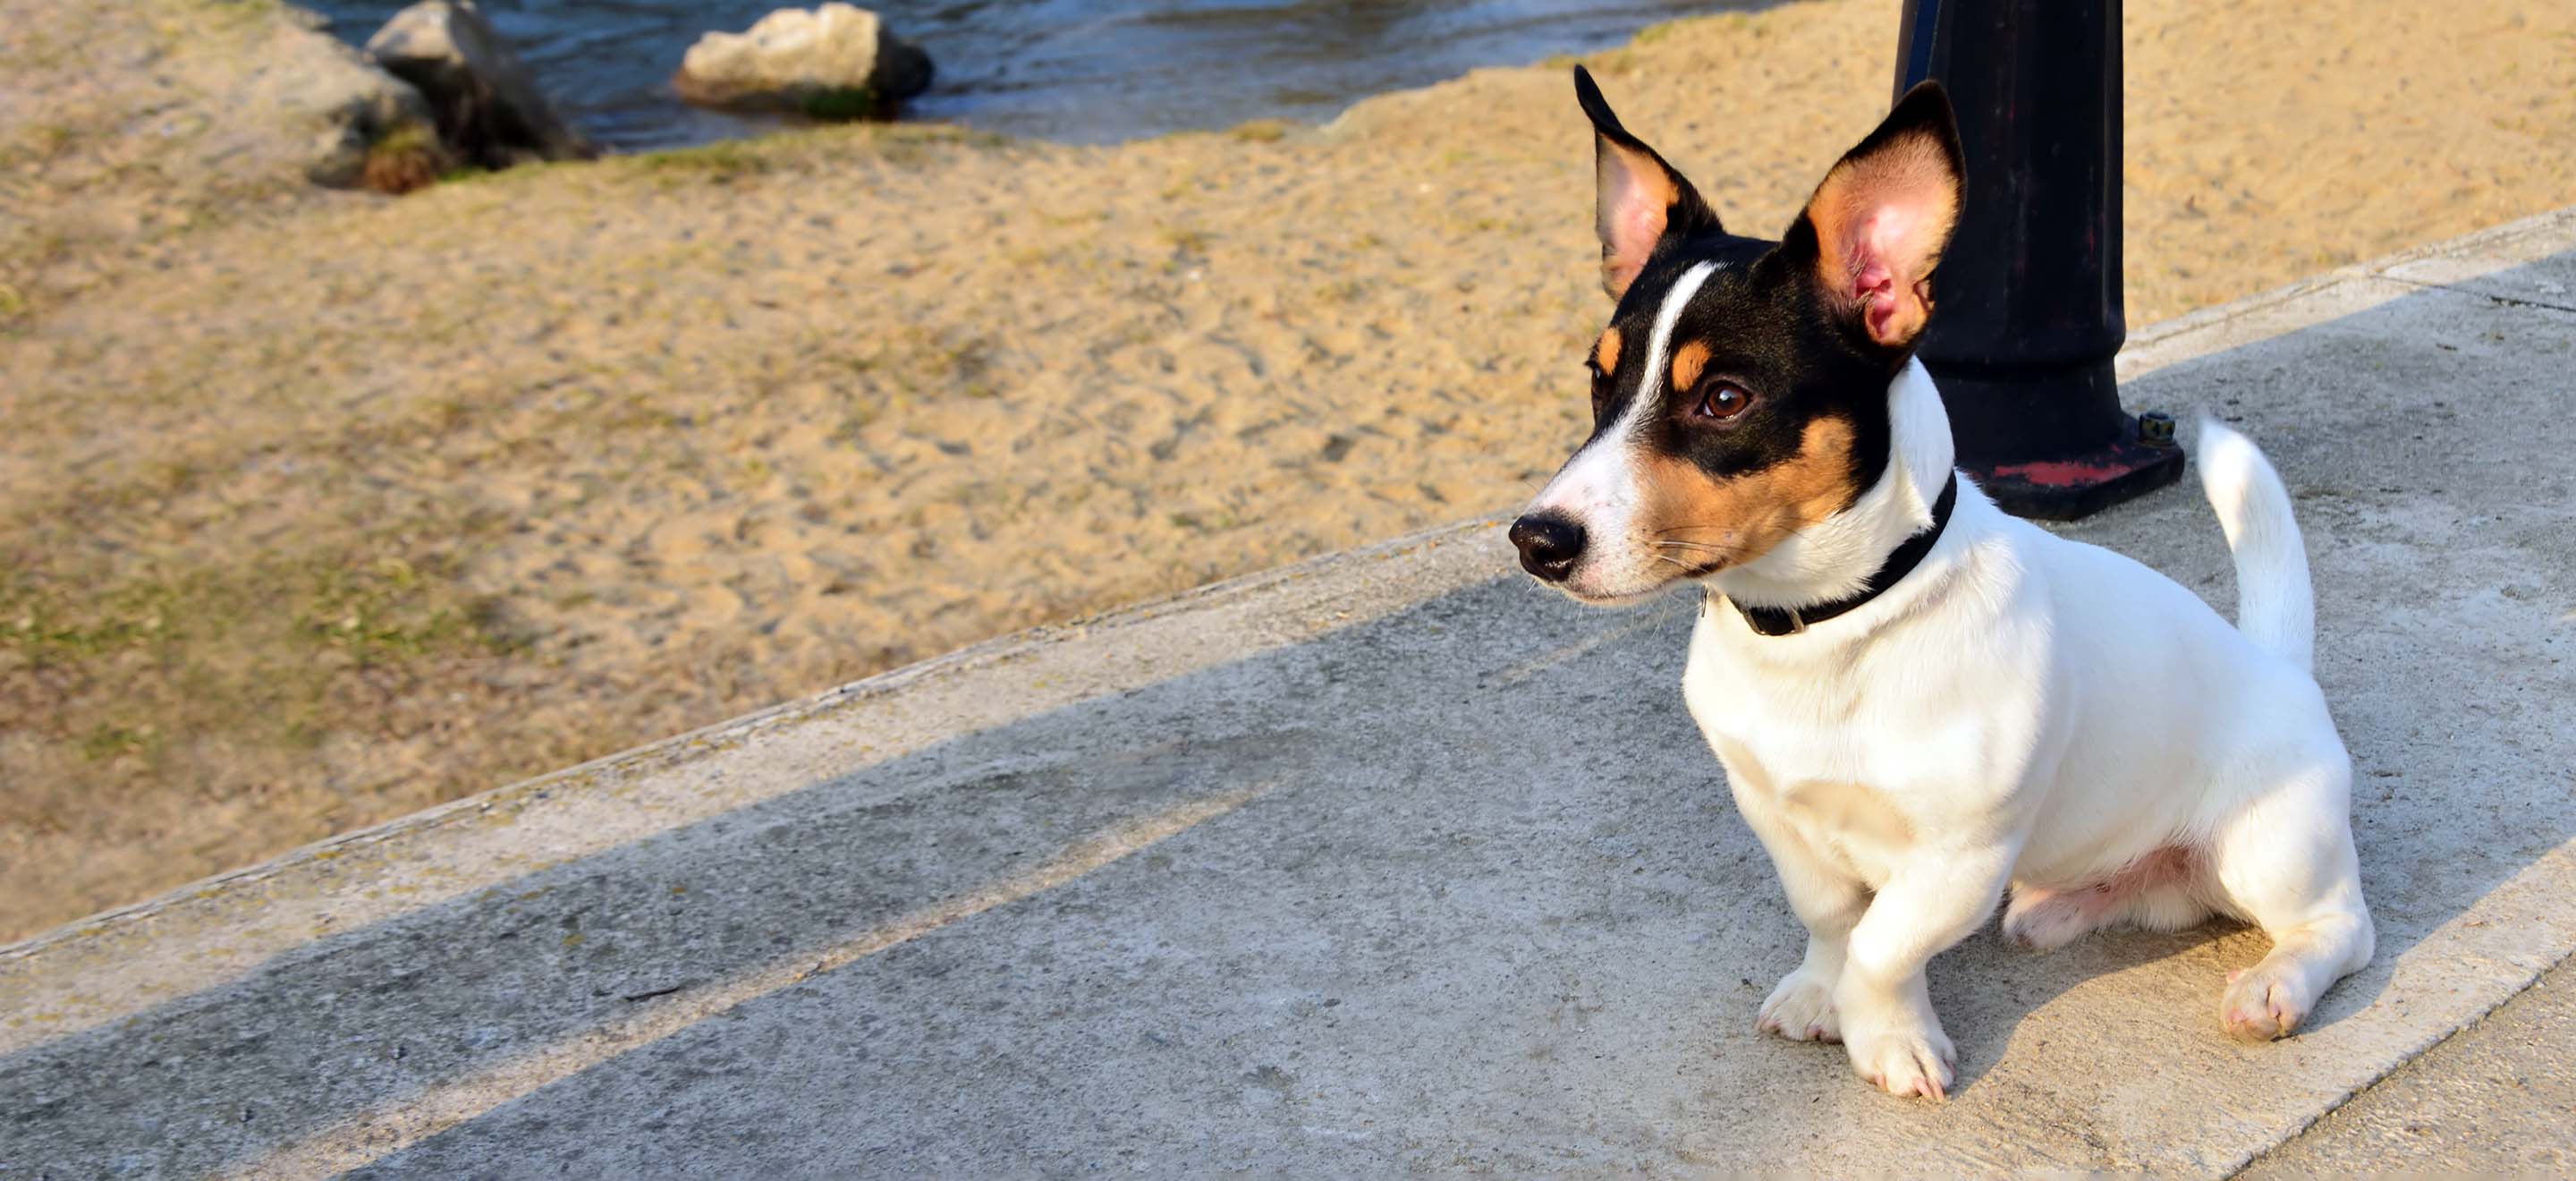 A Toy Fox Terrier dog standing on the sidewalk next to the beach image